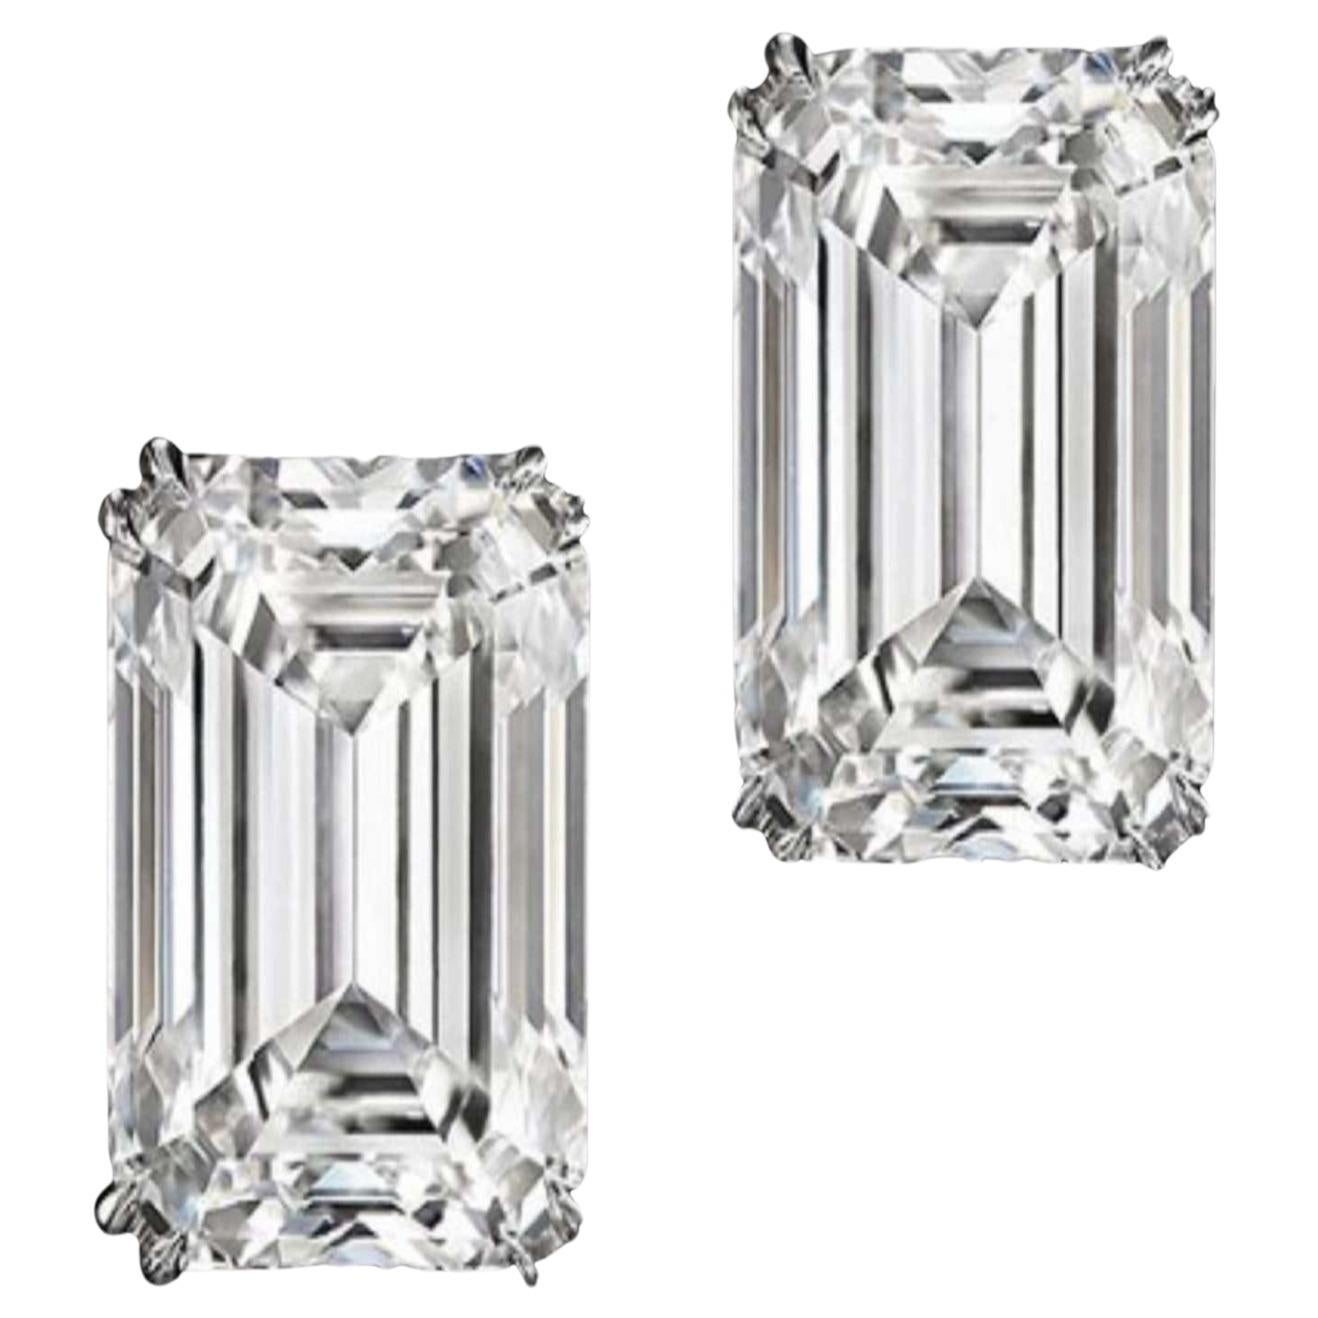 Exceptional Flawless GIA Certified 4.23 Carat Emerald Cut Diamond Studs